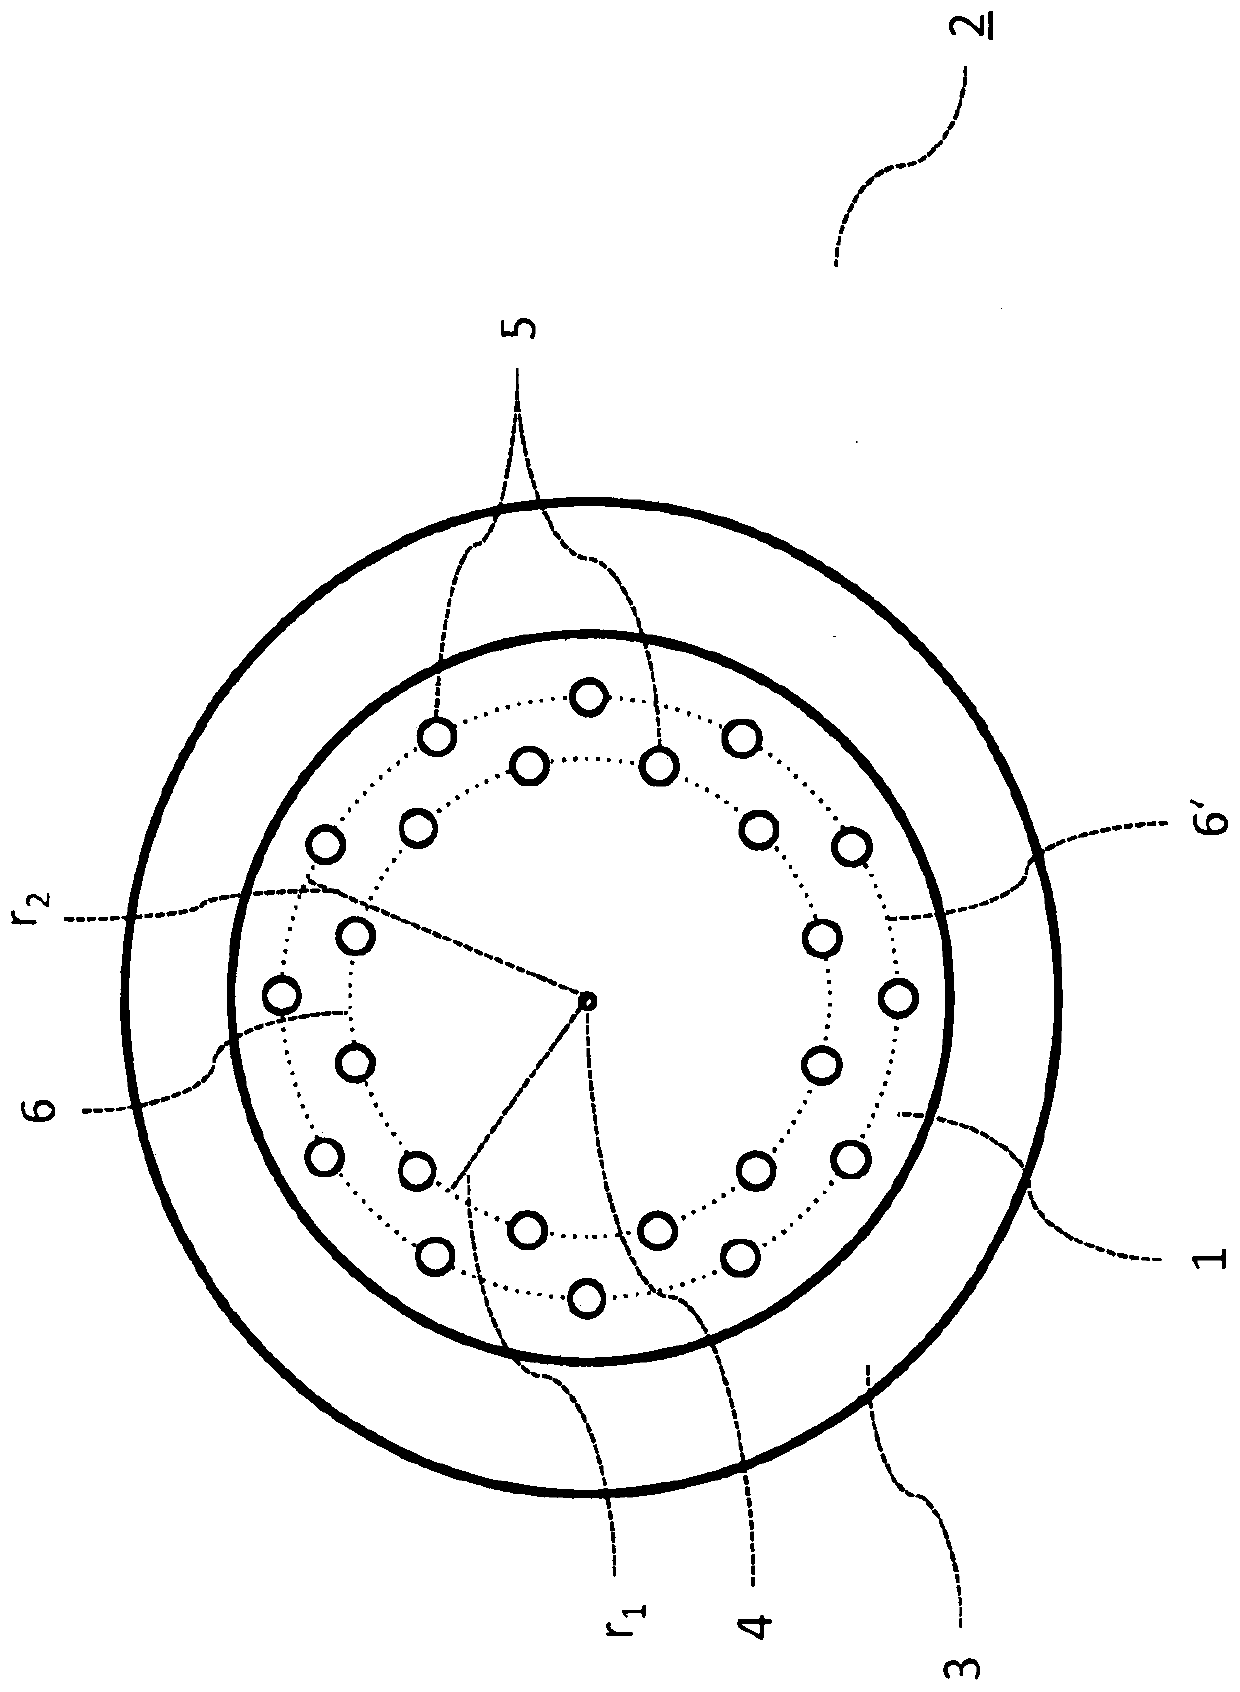 Drum, method for removing a tire and method for shrink fitting a tire onto the shaft of a roller